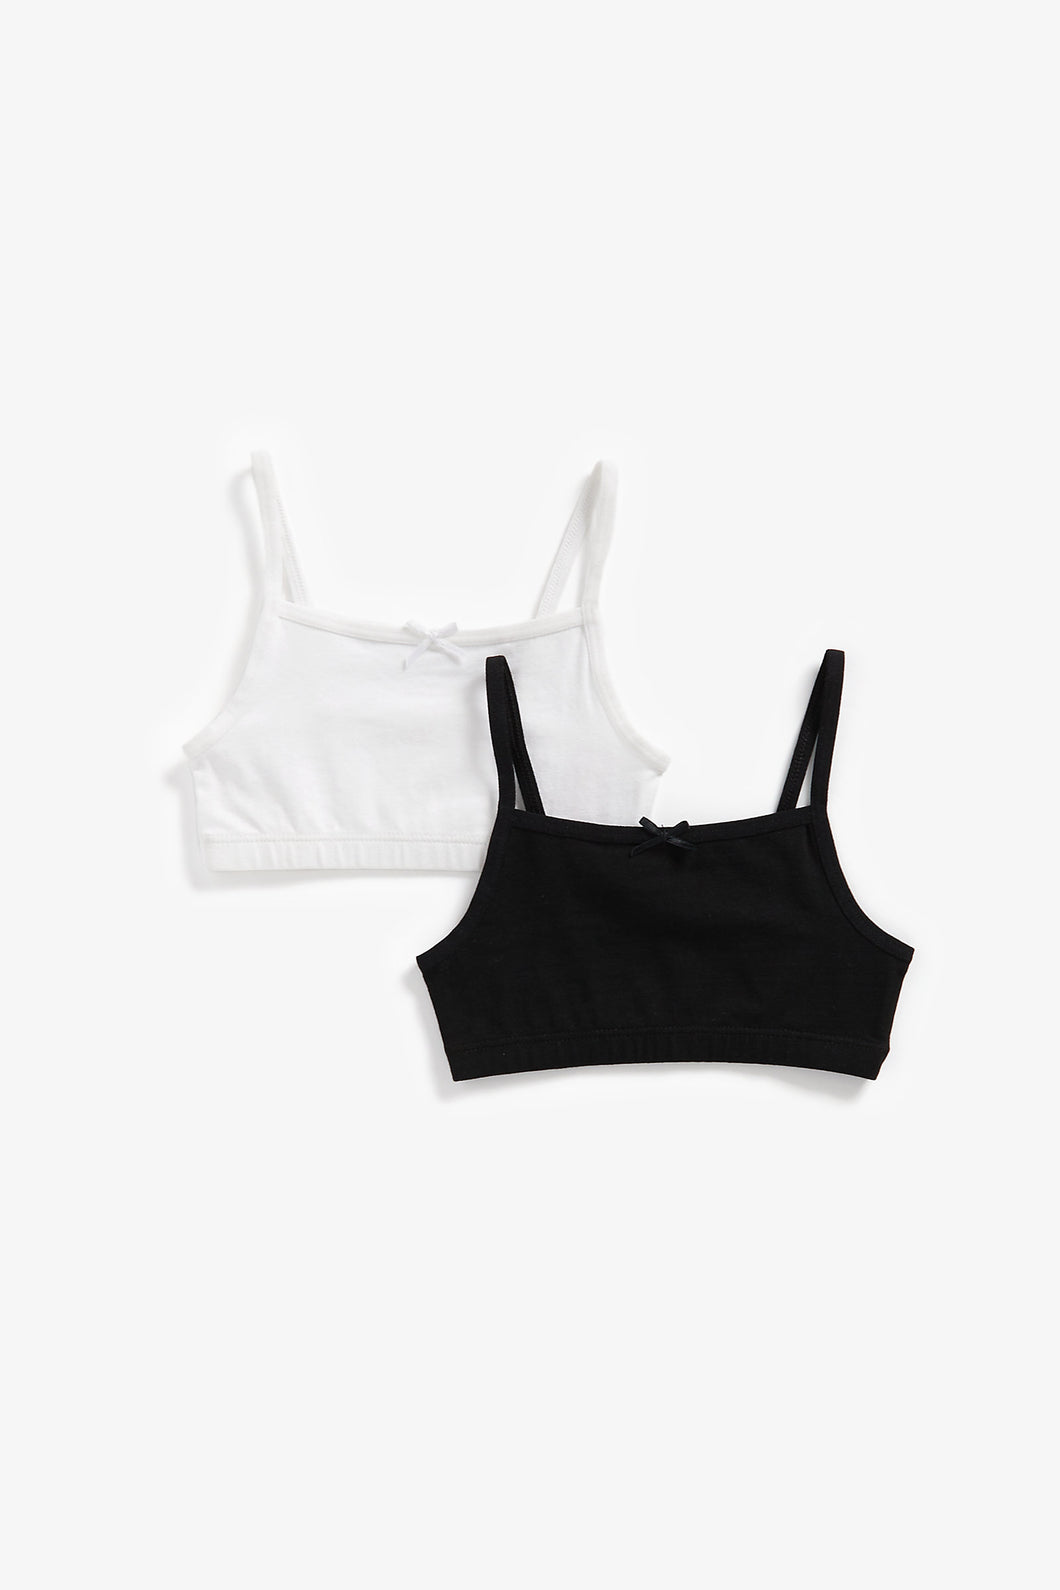 Mothercare Black And White Crop Tops - 2 Pack